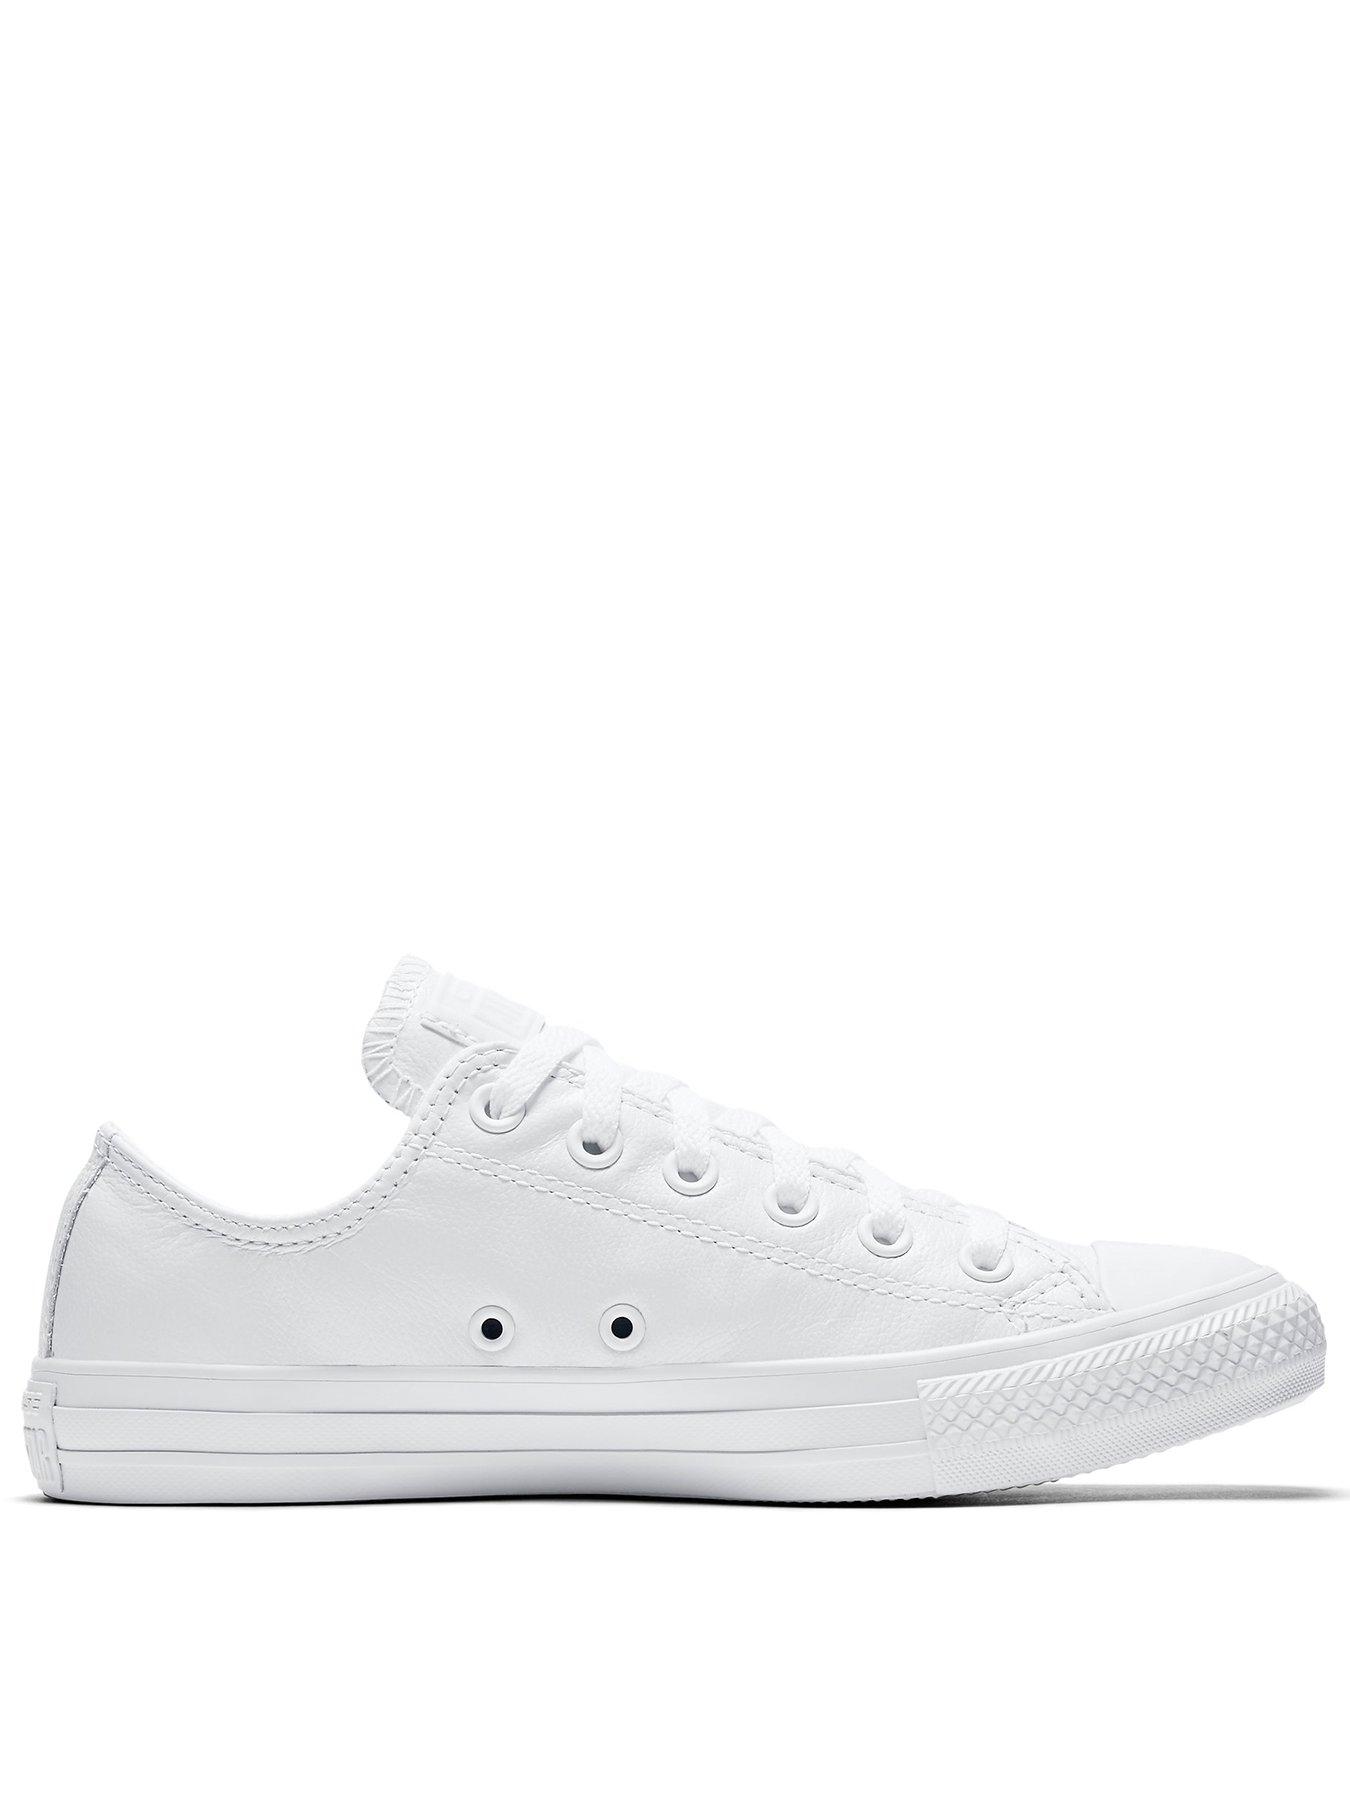 Converse Chuck Taylor All Star Ox White very.co.uk